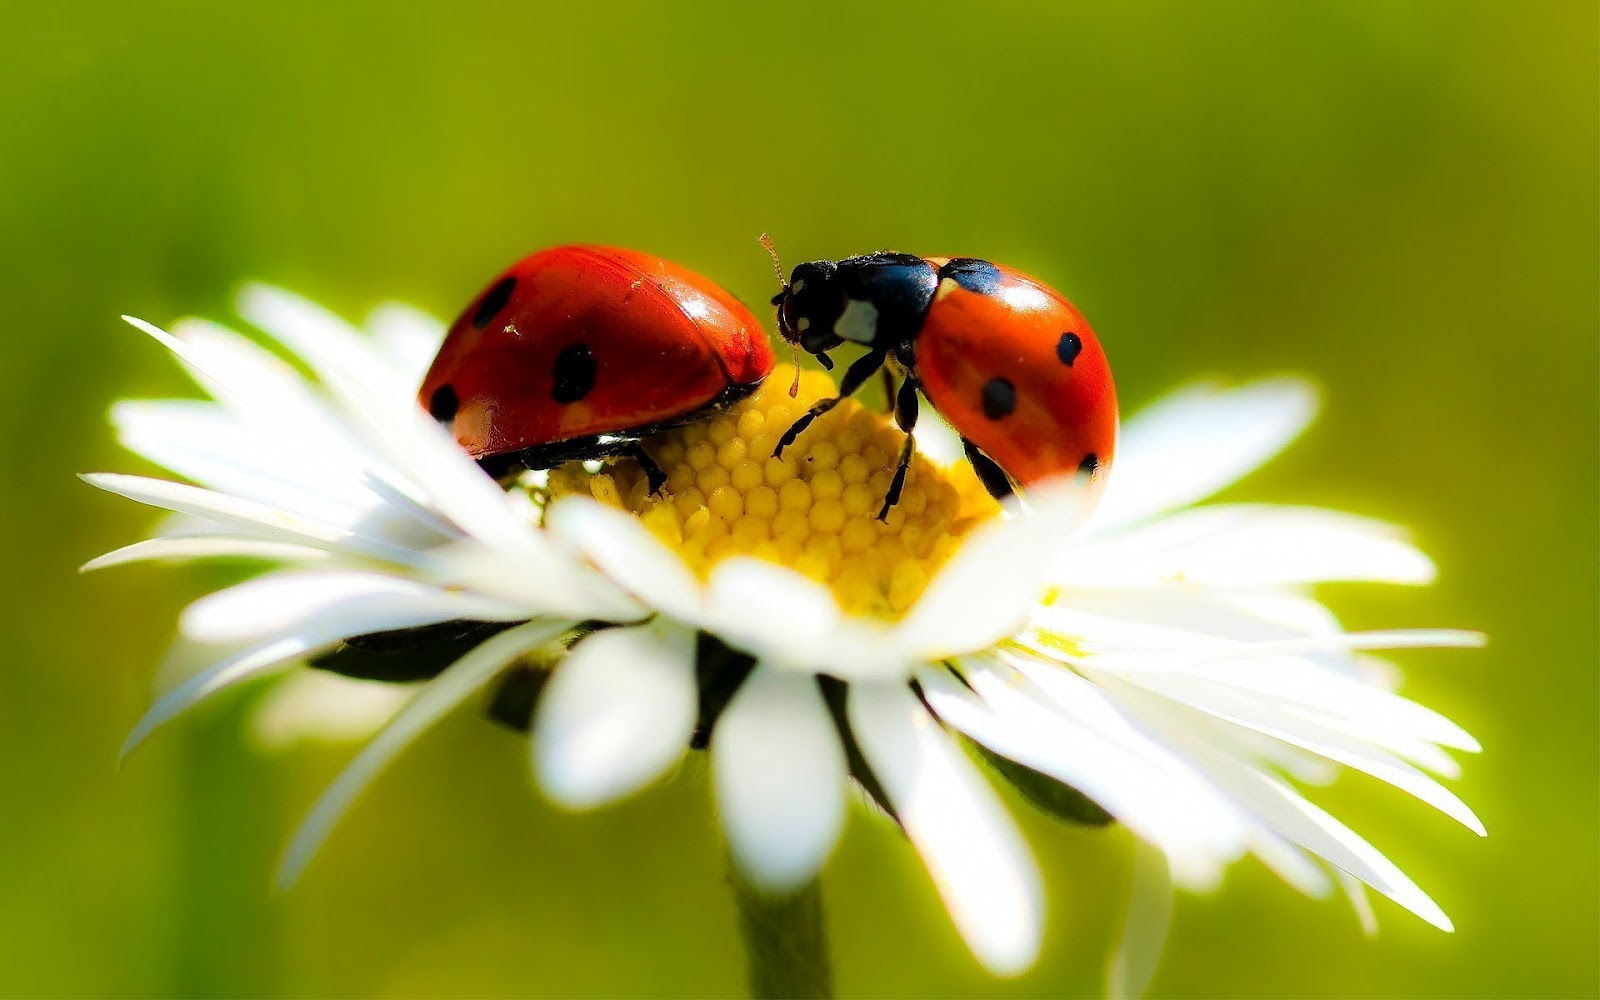 http://4.bp.blogspot.com/-TTw24Y9P5Tc/UDe6GmH77qI/AAAAAAAABAQ/x5x7aF6k61k/s1600/hd-ladybug-wallpaper-with-two-ladybugs-on-a-white-flower-hd-ladybugs-wallpapers-backgrounds-pictures-photos.jpg.jpg